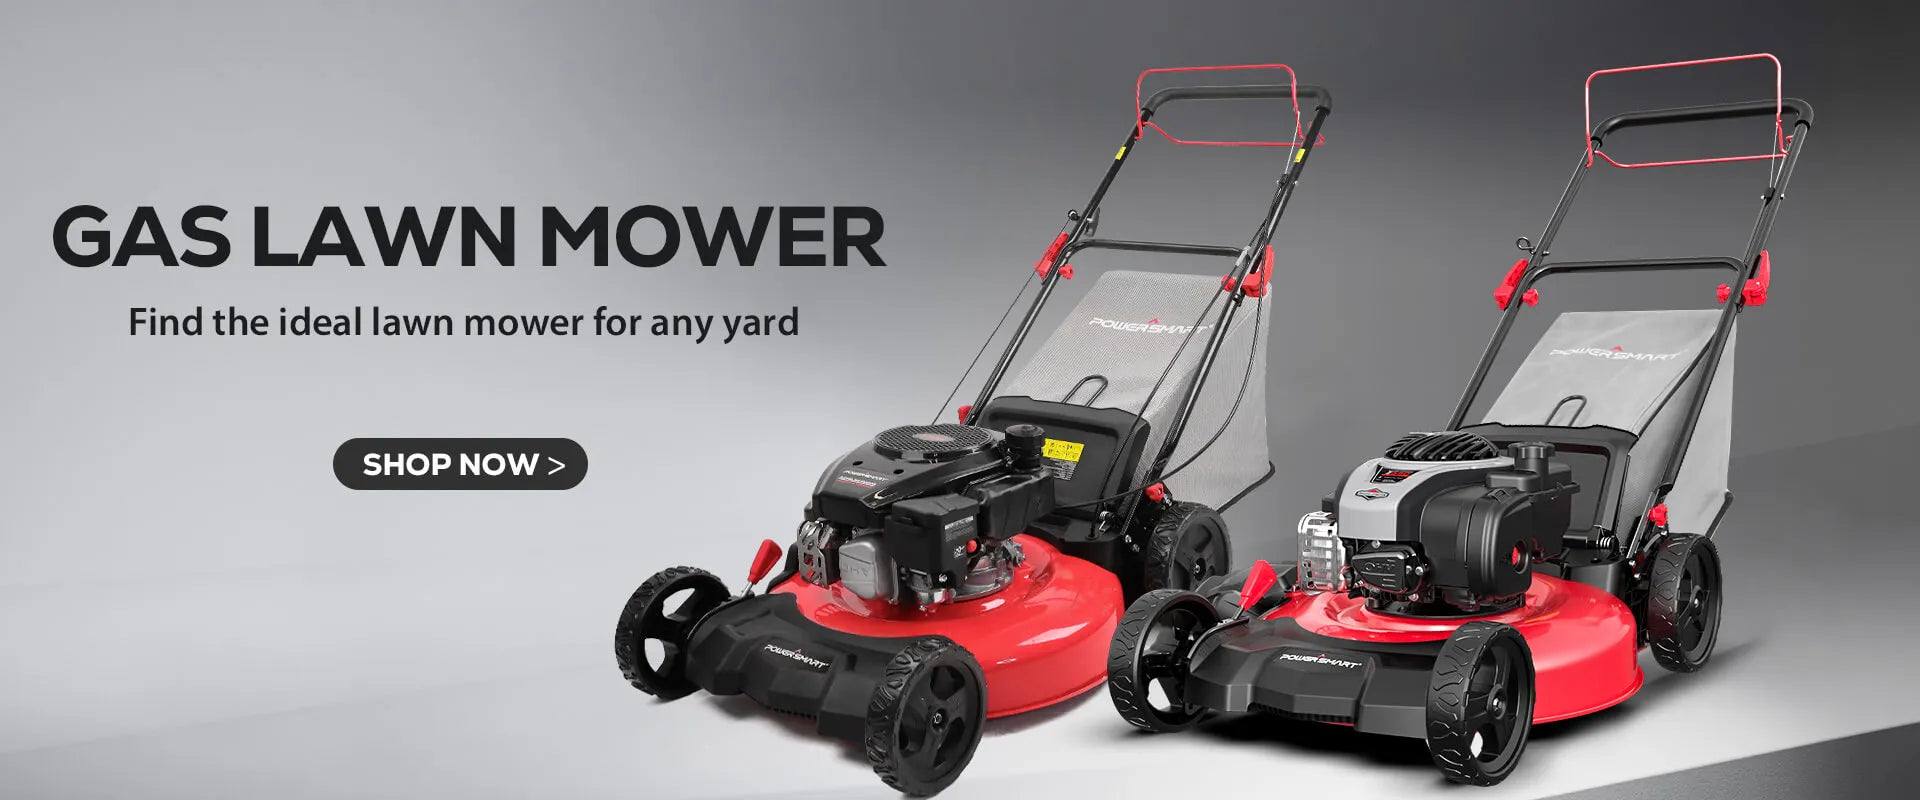 Gas lawn mowers are a popular choice for homeowners due to their powerful performance and versatility.